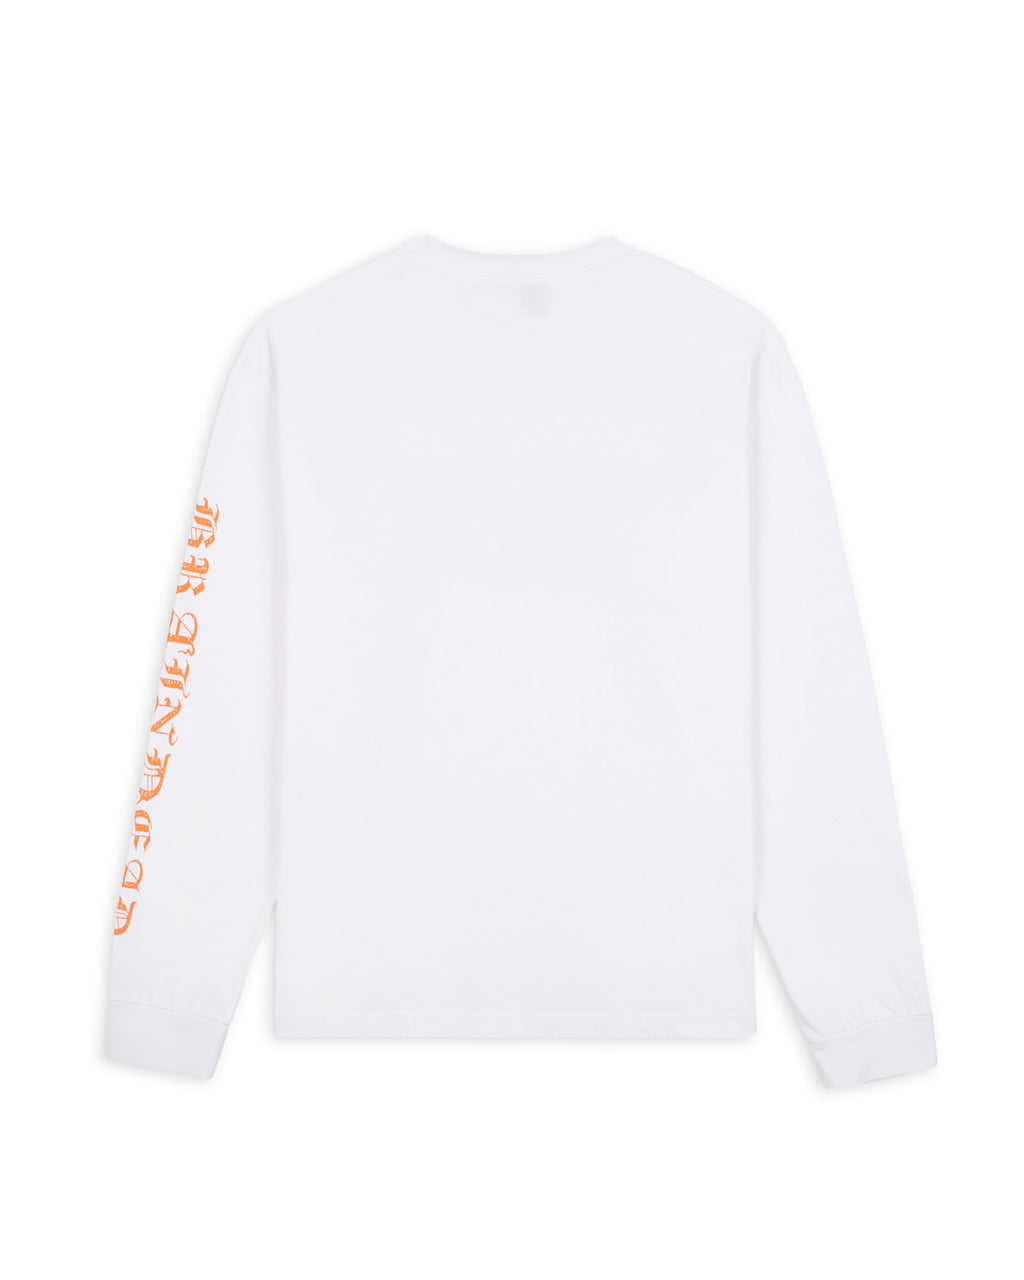 Wall of Fire Long Sleeve - White 2